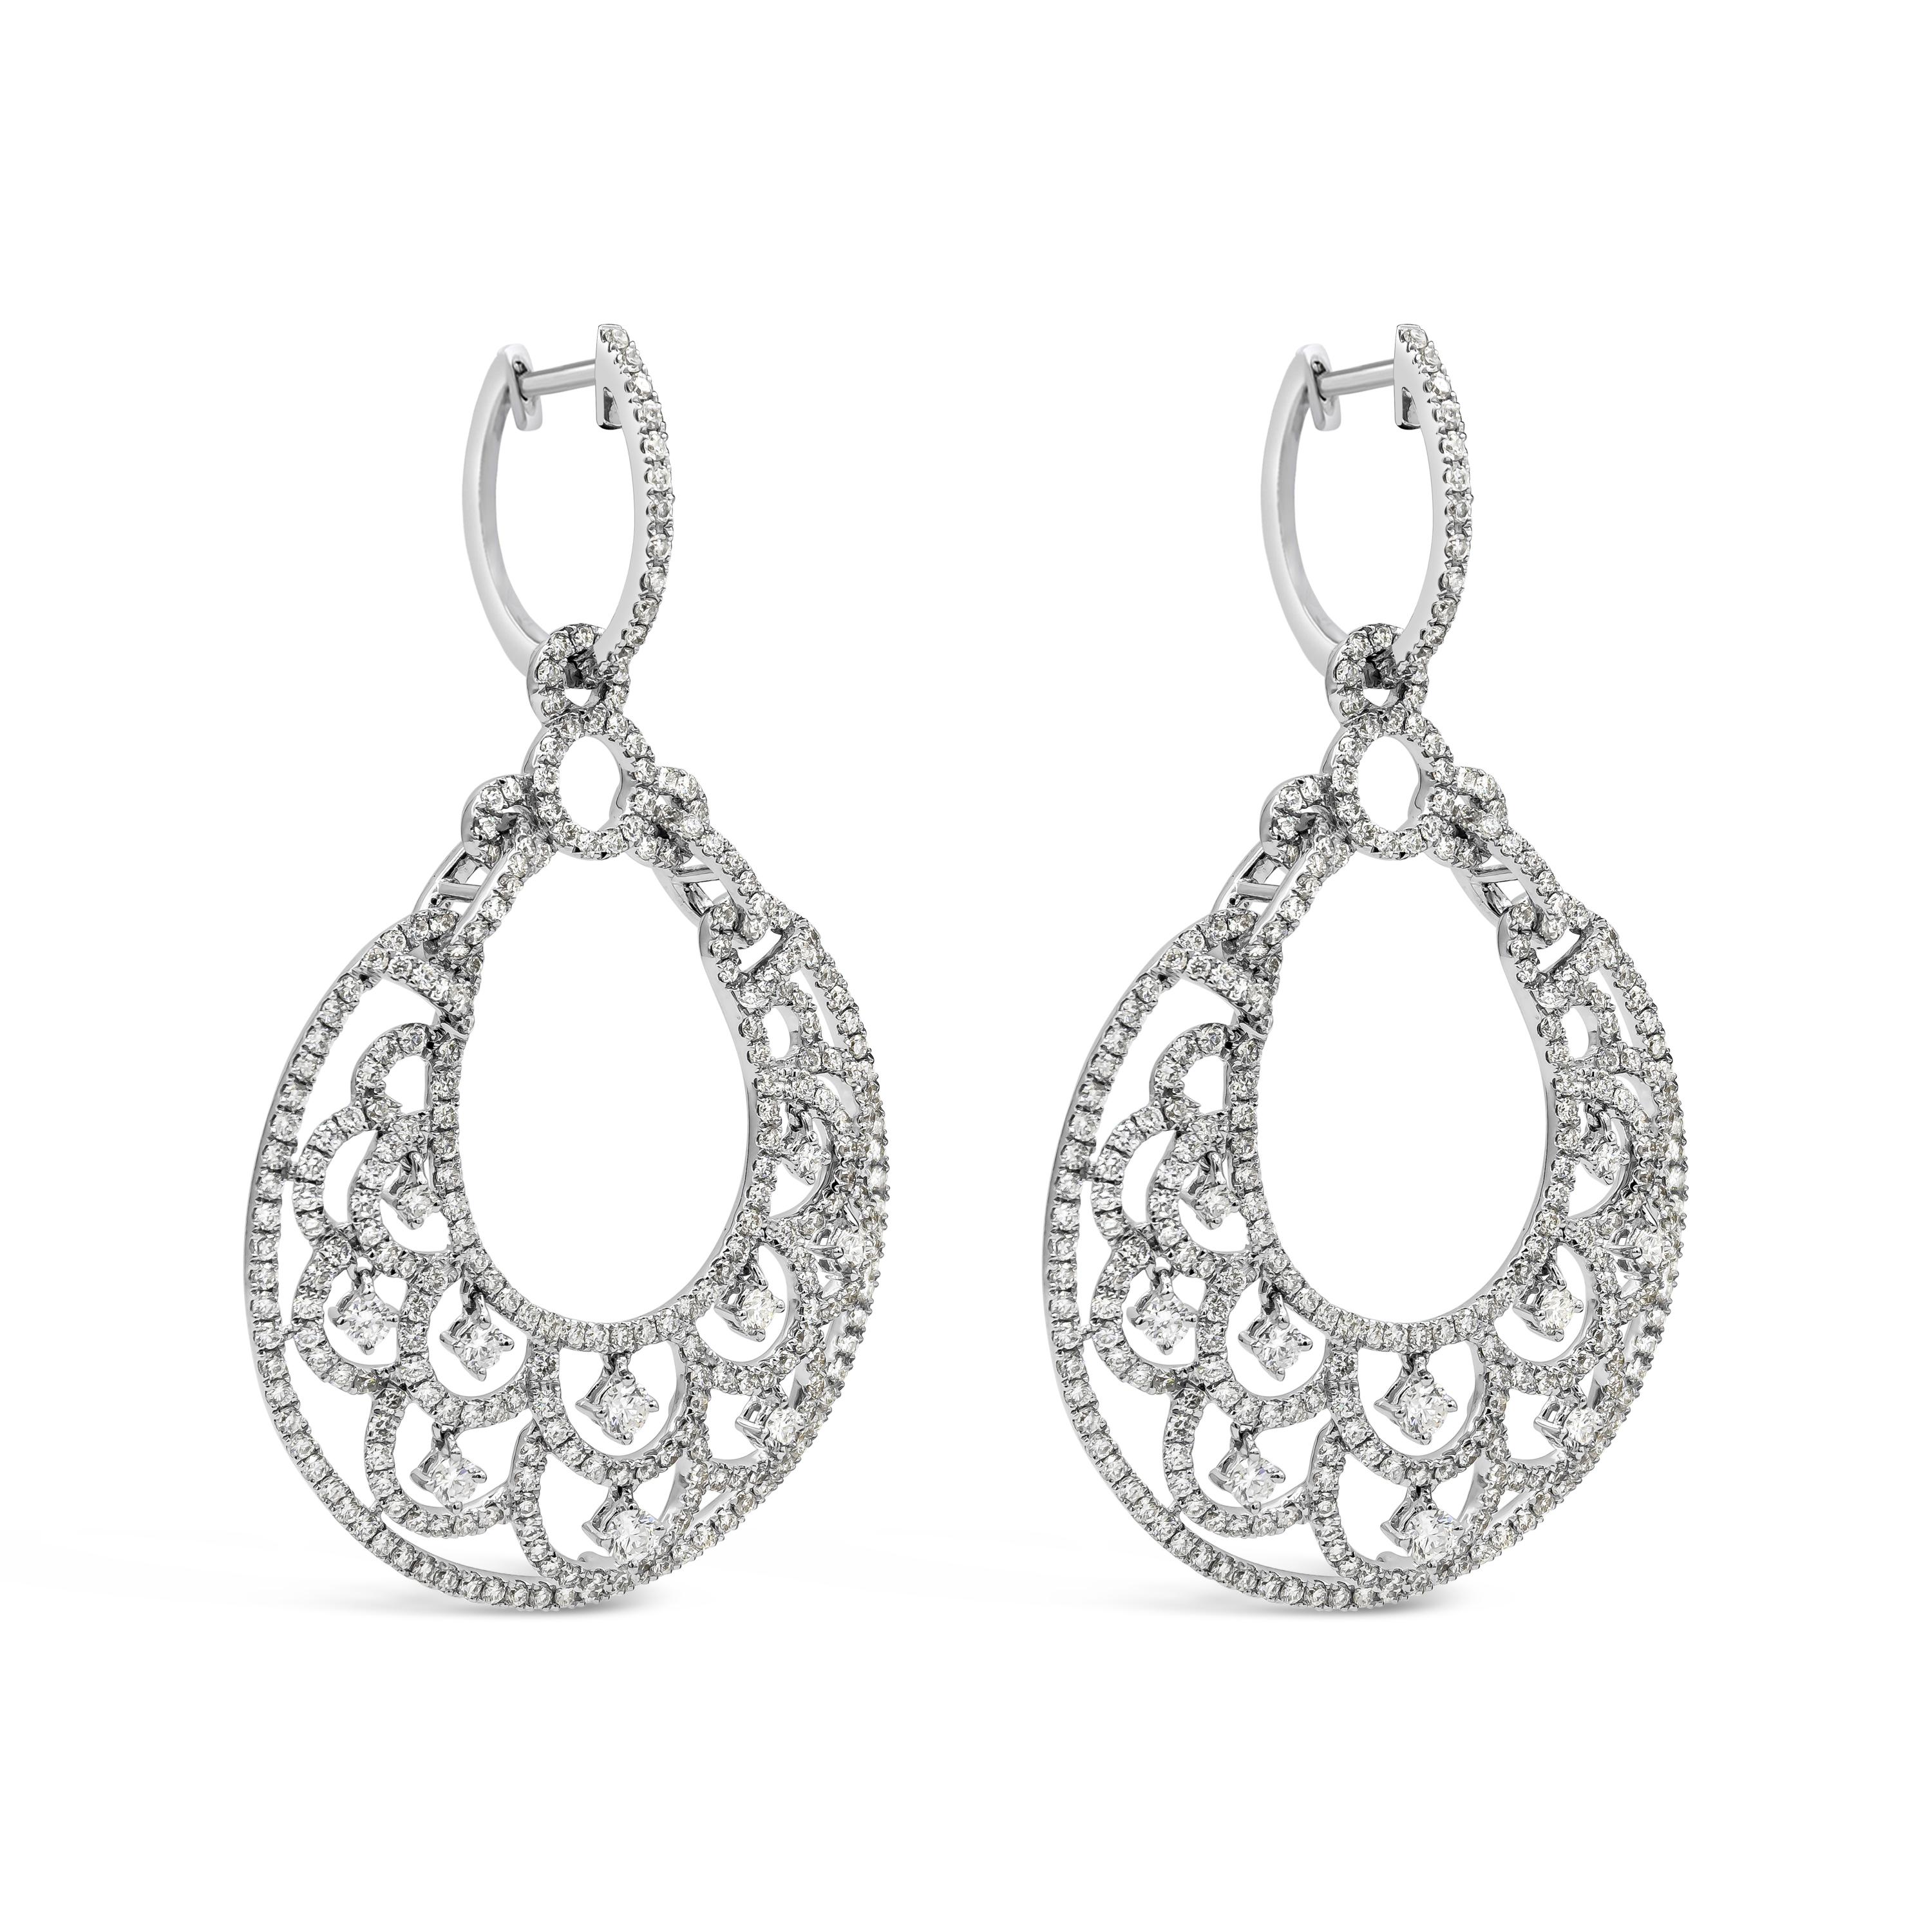 An appealing pair of earrings showcasing a croissant shape open work design dangling earrings. Diamonds weigh 4.68 carats total, Accented by single cut diamonds each set and free dangling. Suspended on a diamond encrusted lever back. Made in 18k